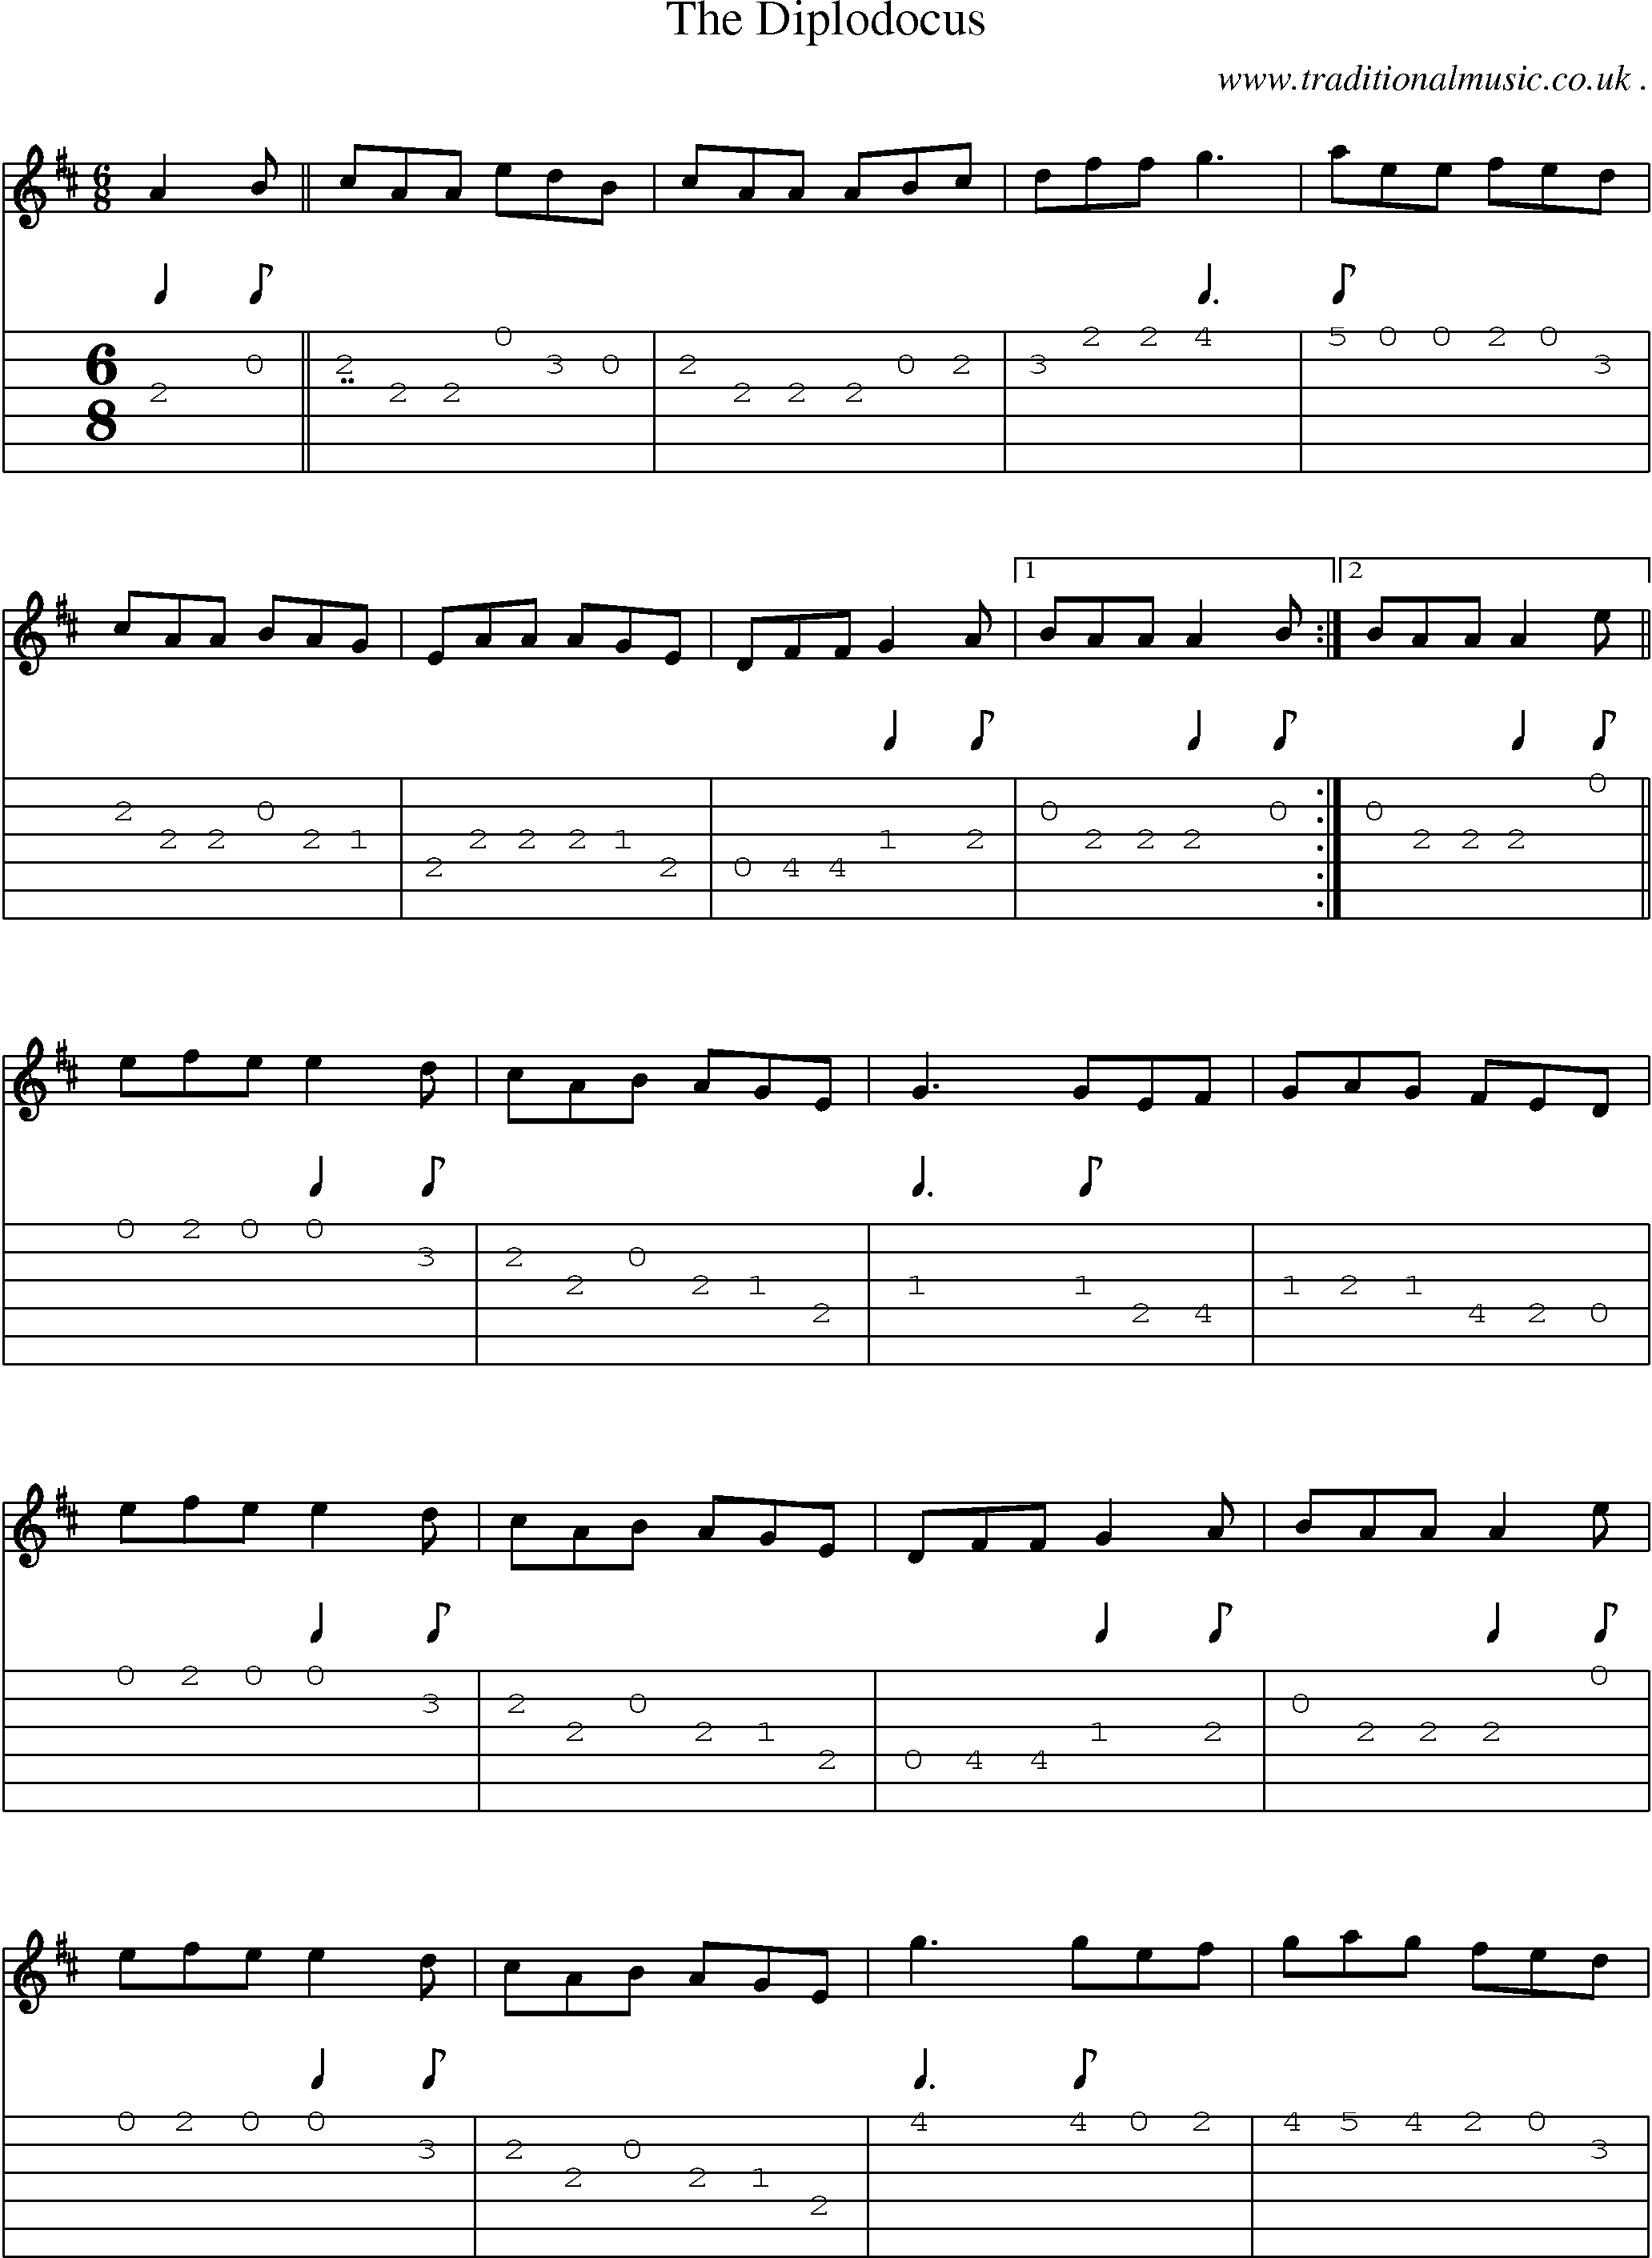 Sheet-Music and Guitar Tabs for The Diplodocus